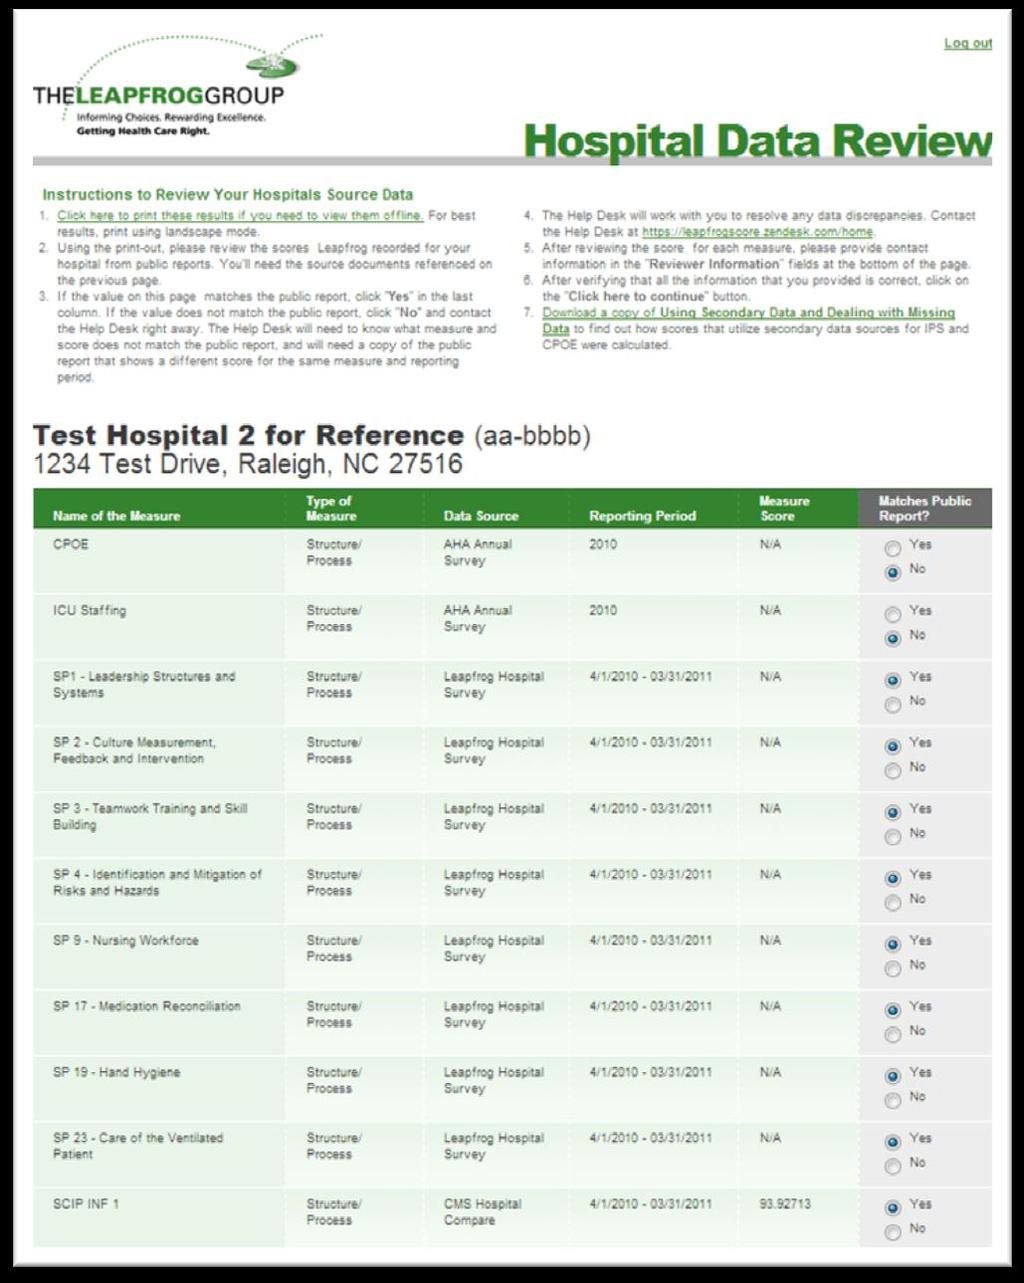 Source Data Instructions for hospital to review their source data and a link to the help desk For each measure, hospitals are provided with the measure name, type of measure, data source (primary or